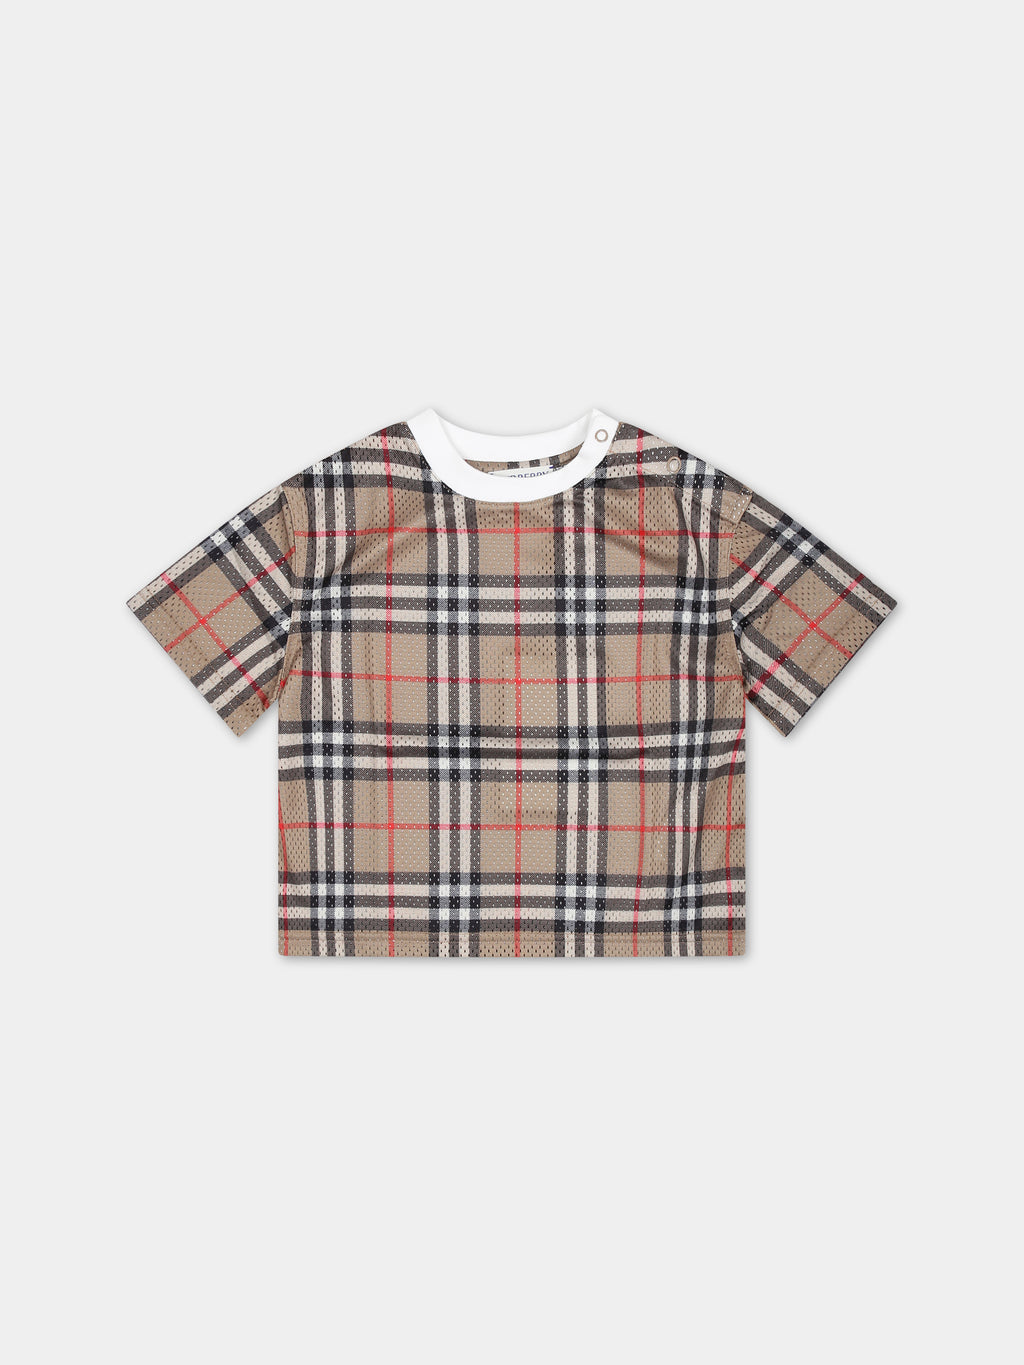 Beige T-shirt for baby boy with iconic vintage check